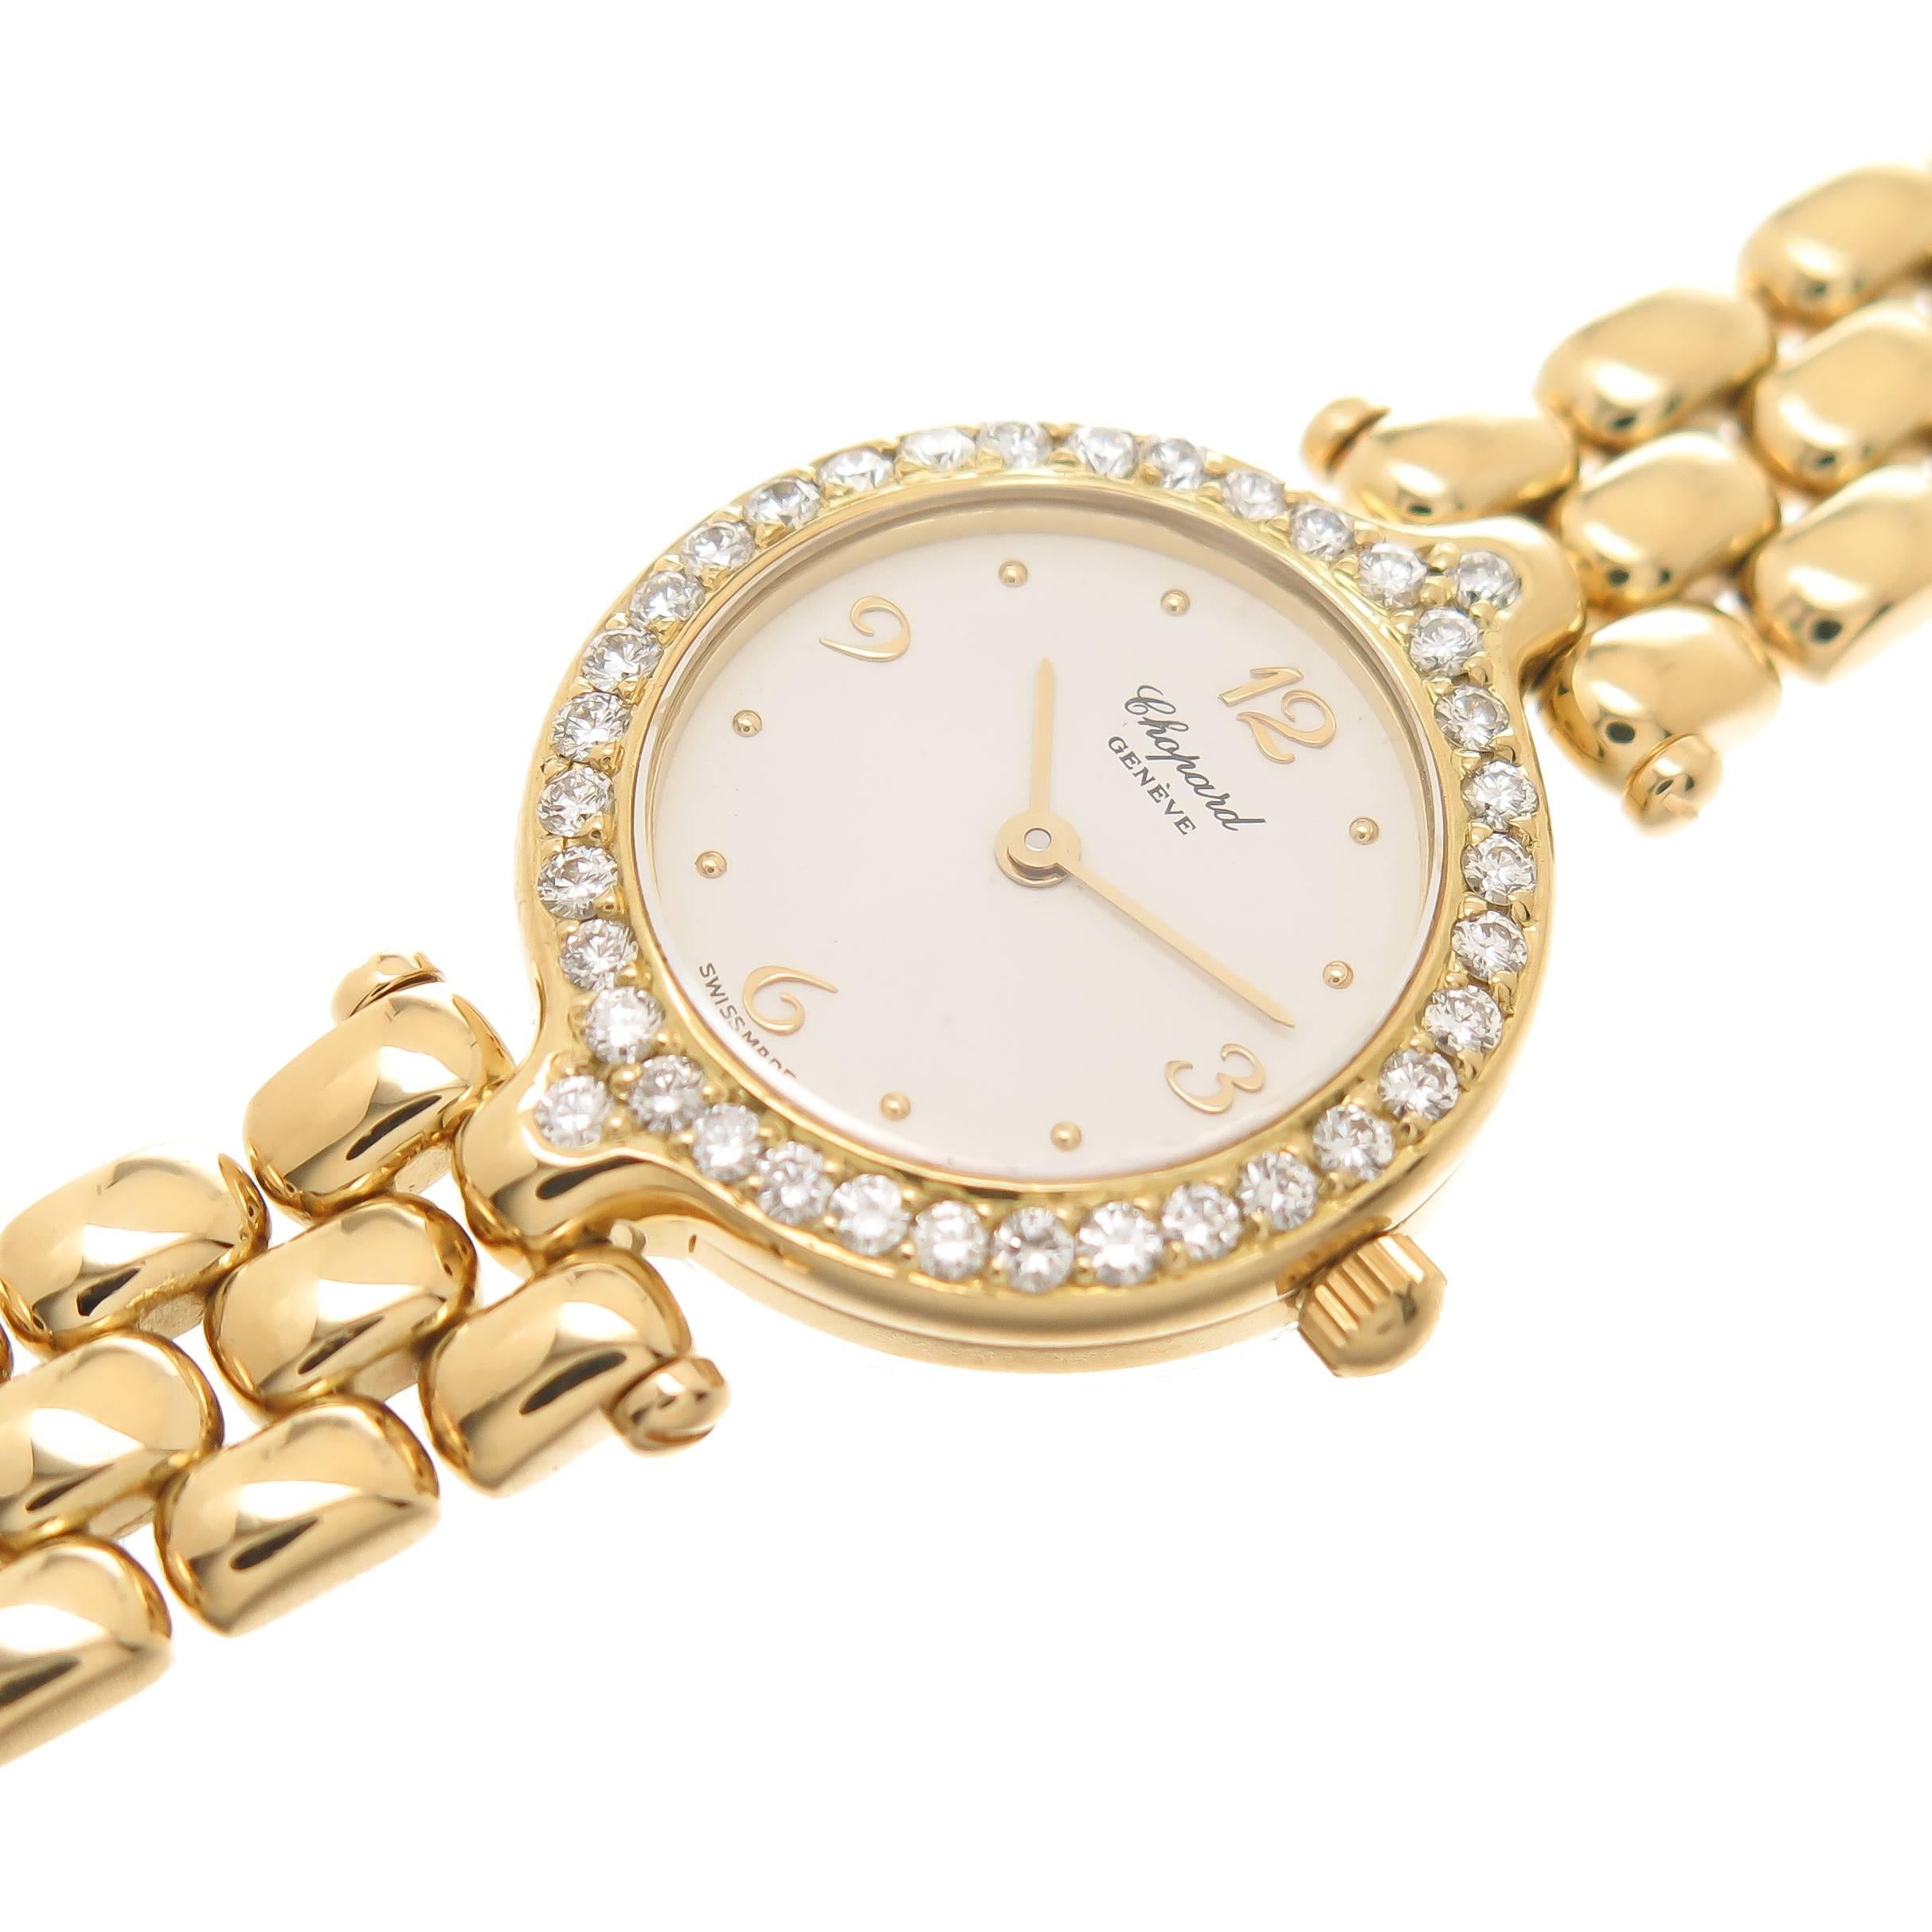 Circa 2005 Chopard Ladies 18K Yellow Gold Wrist watch, 20 MM water resistant case, Round Brilliant cut Diamond set bezel totaling 1 Carat. 3/8 inch wide Flexible link bracelet with safety lock clasp. Total length 6 3/8 inch. Quartz movement, white